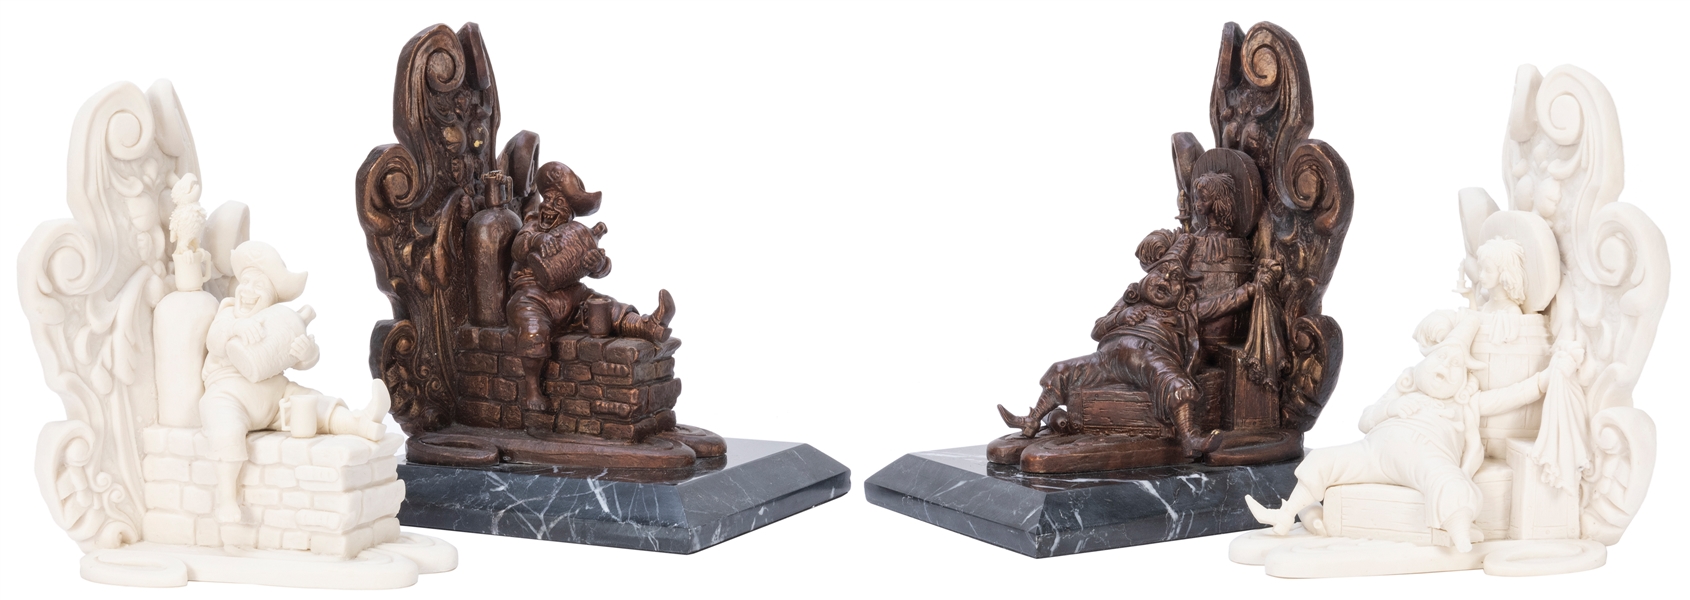  Pirates of the Caribbean Bookends and Production Whiteware ...